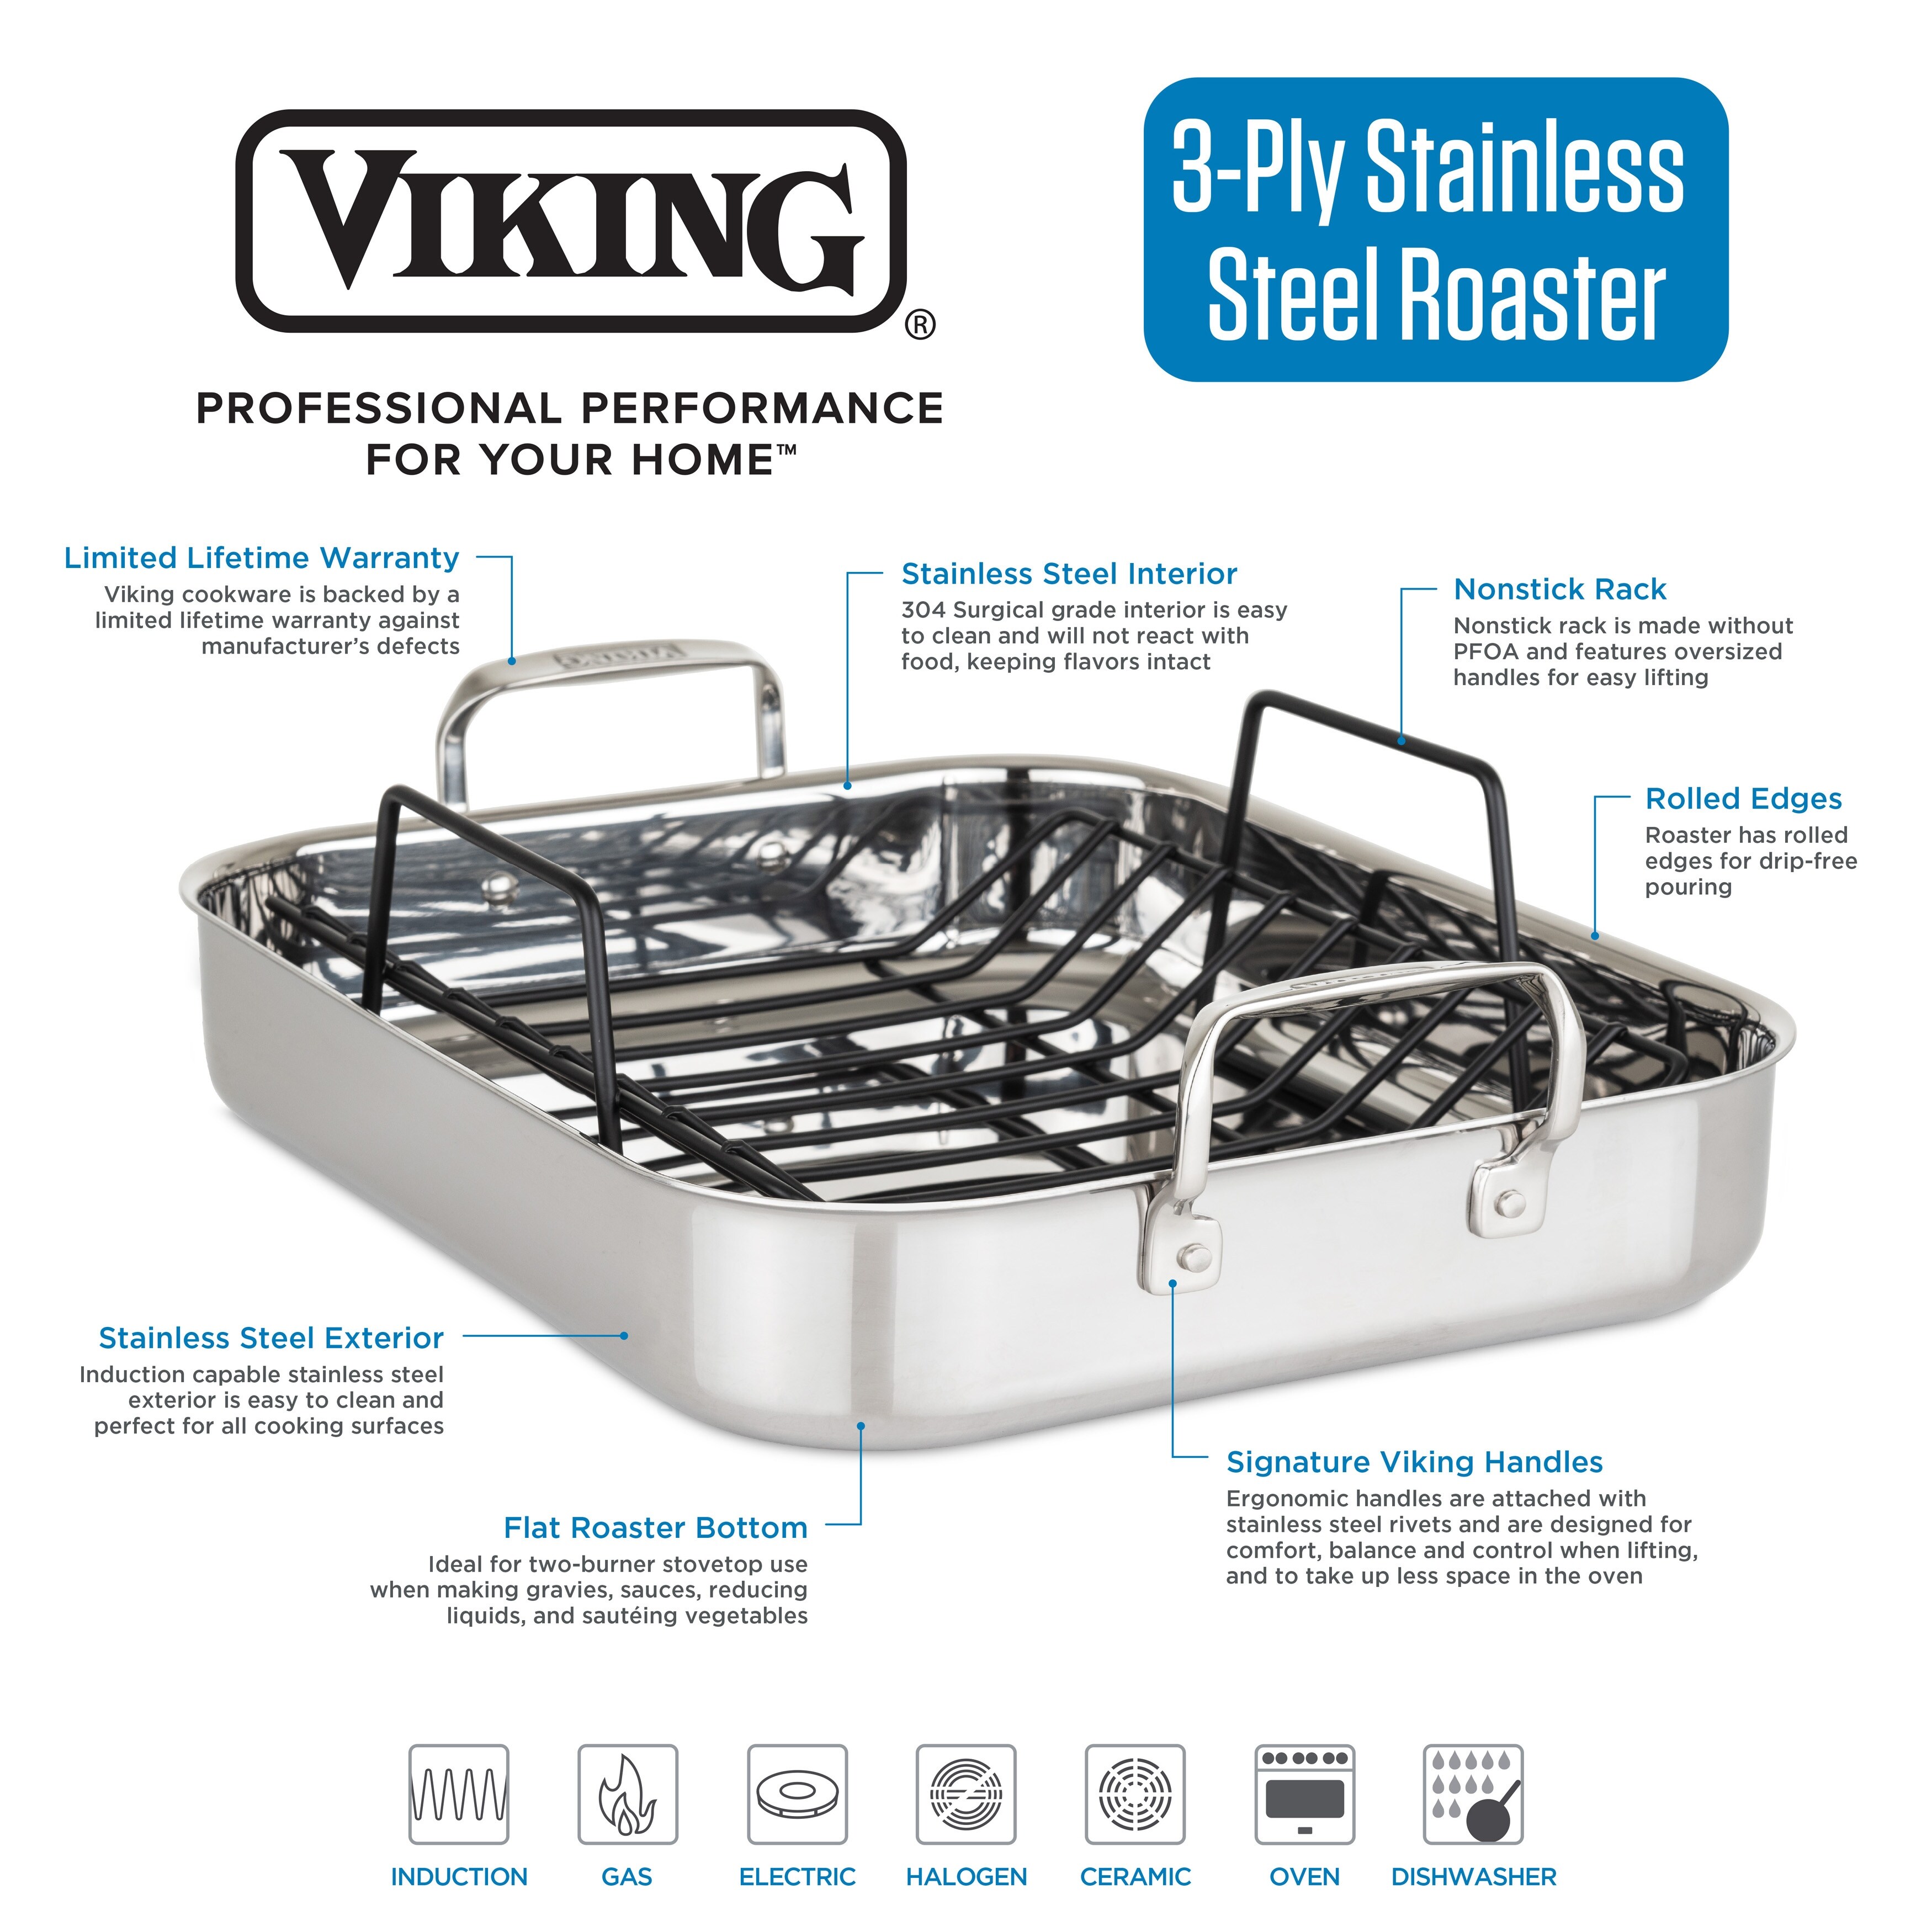 Viking Culinary 3-Ply Stainless Steel Roasting Pan, 16 Inch x 13 Inch, Silver - image 3 of 5